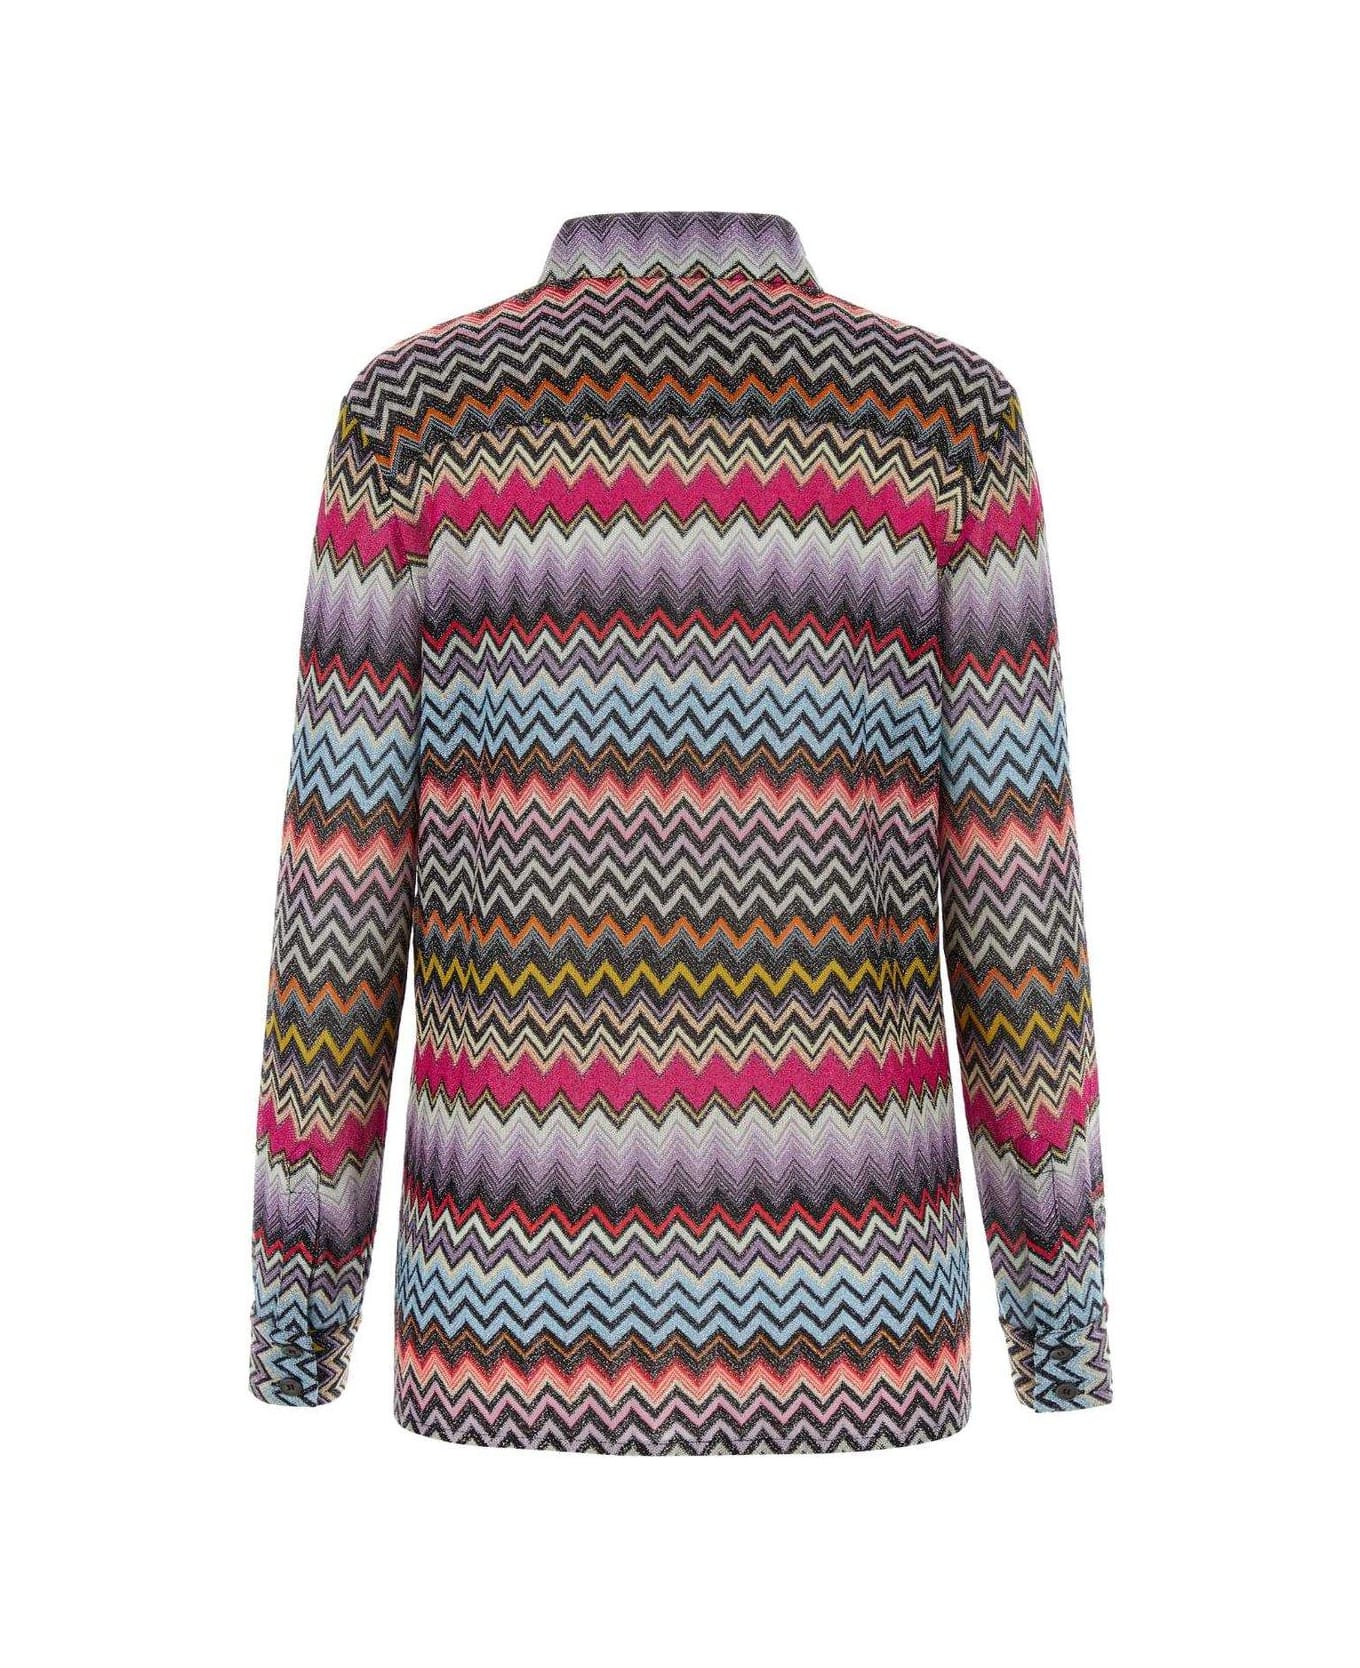 Missoni Patternede Embroidered Button-up Long-sleeved Shirt - MULTICOLORBLKBASE シャツ